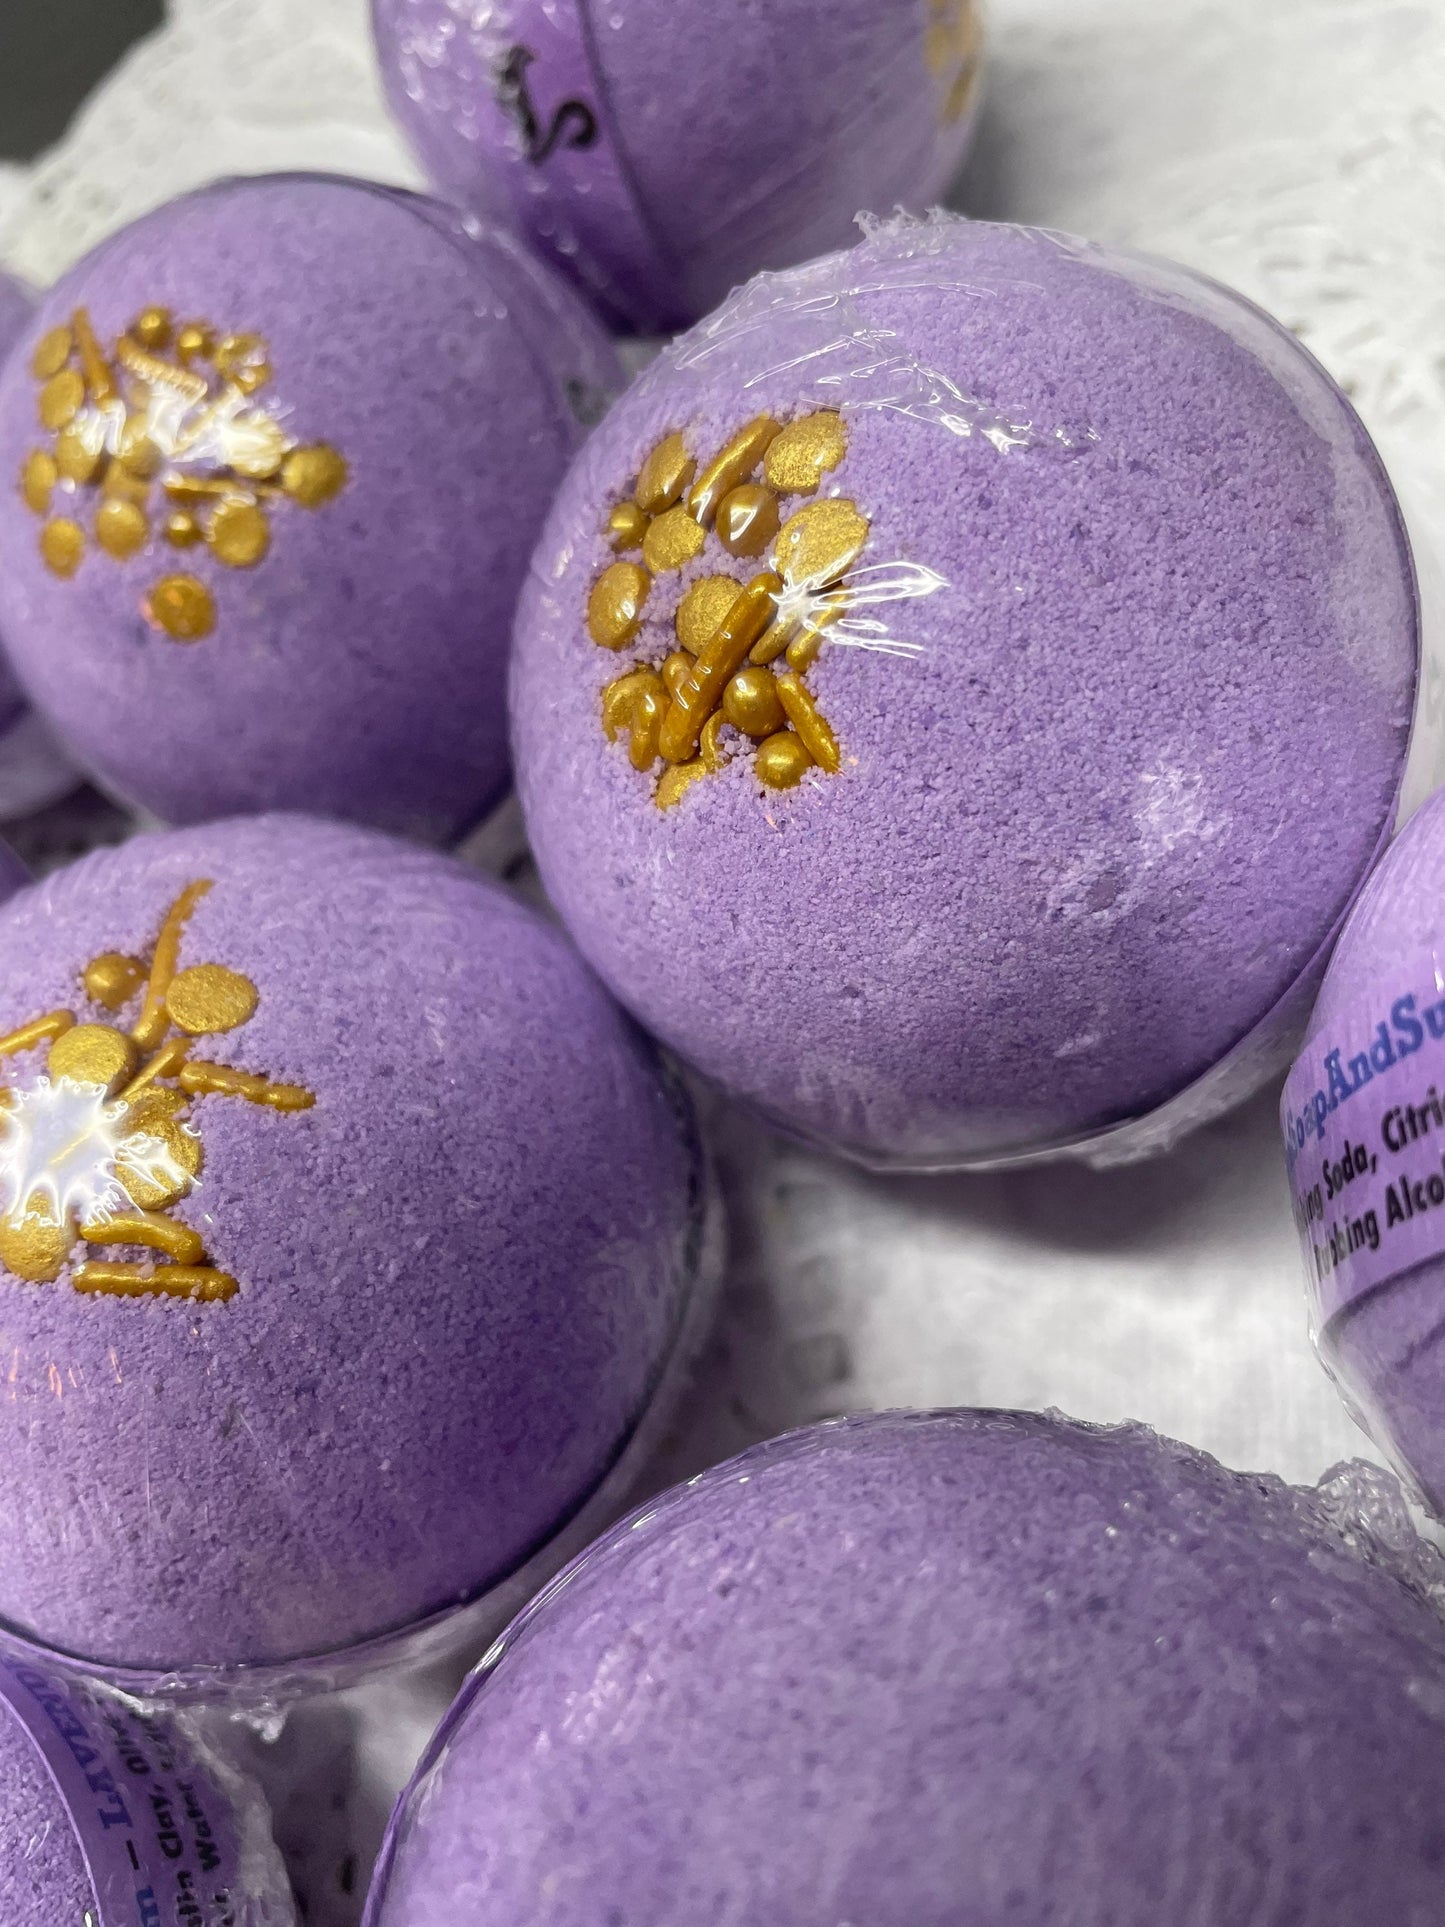 a photo of Lavender Bath Bombs with Embeds of colors topped with gold sugar sprinkles in lavender pastel colors